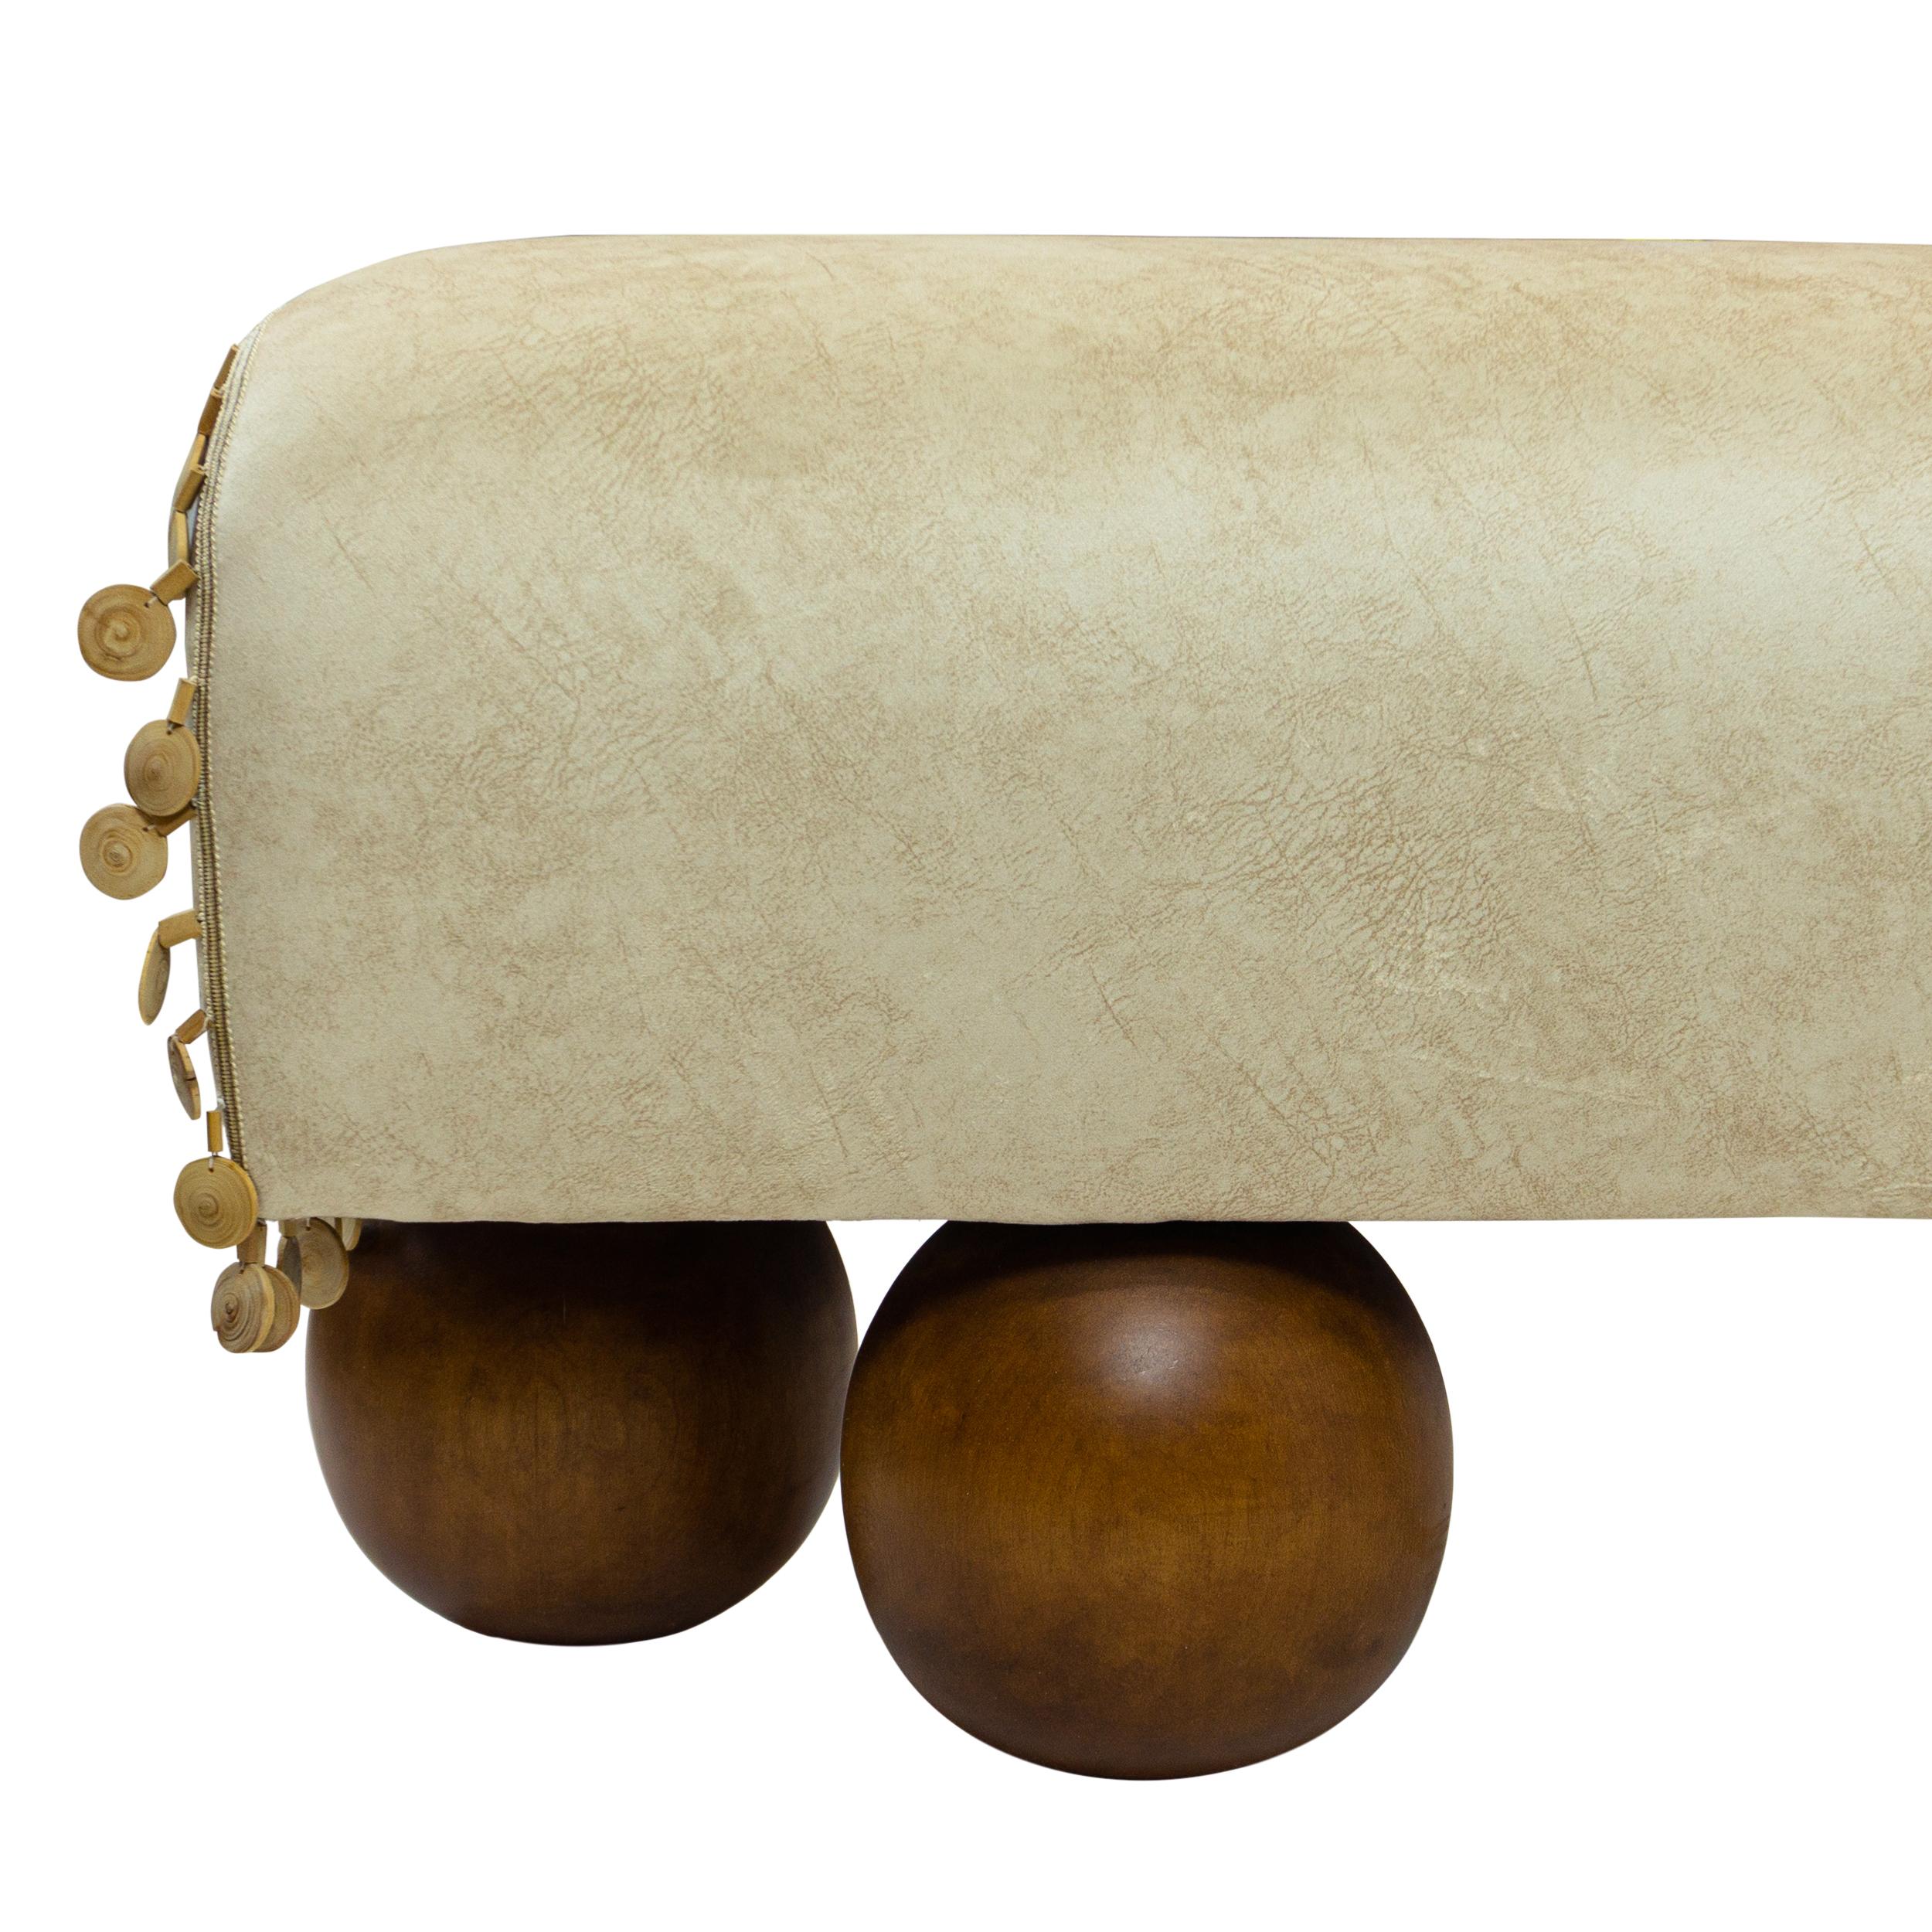 Walnut Ball Foot Bench with Saddle Shaped Seat - Customizable For Sale 1